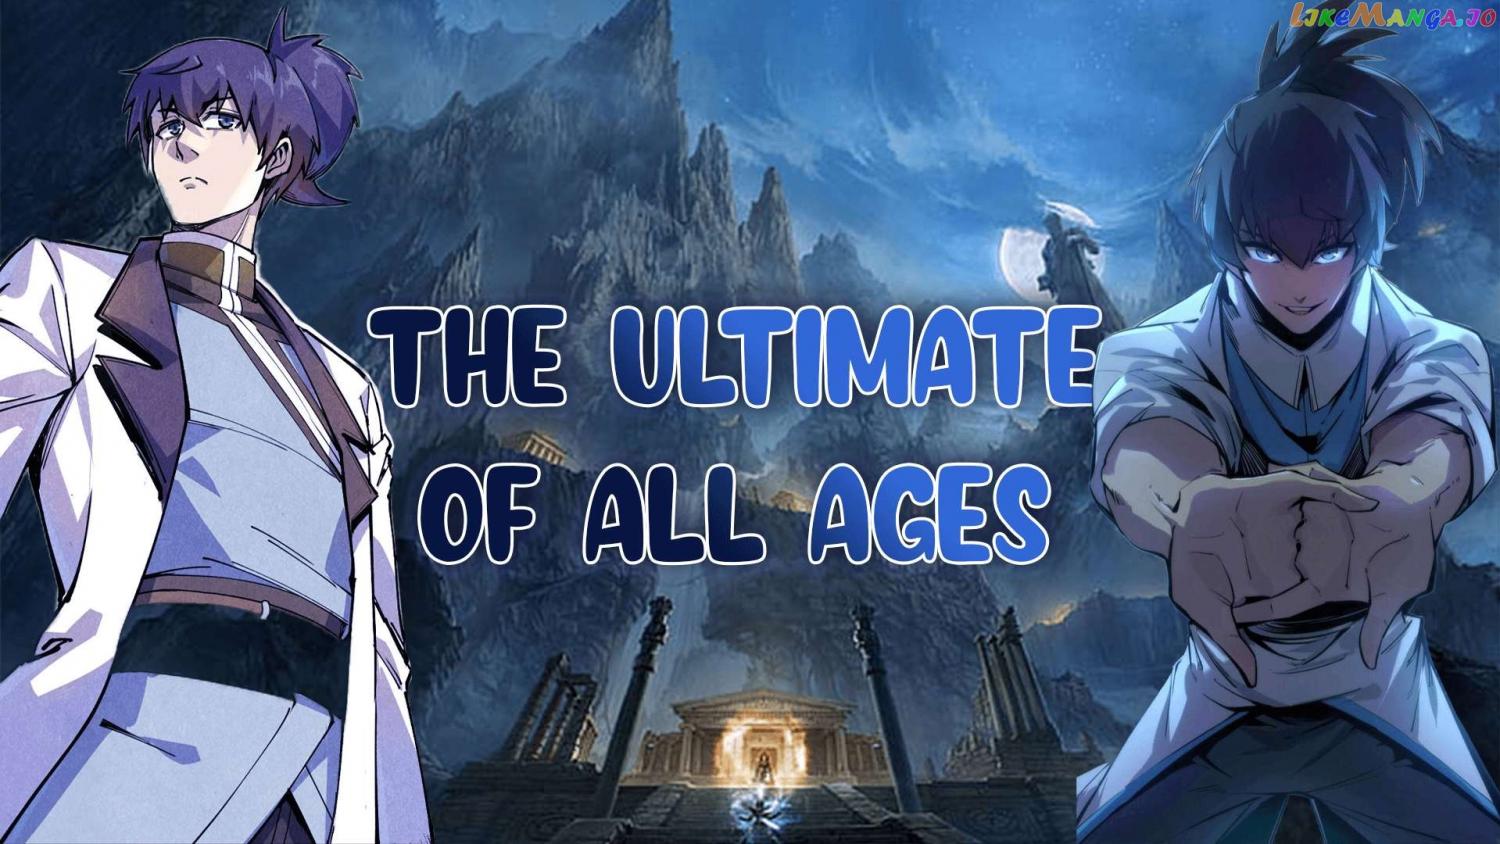 the ultimate of all ages chapter 205 - The Ultimate of All Ages Manga Online